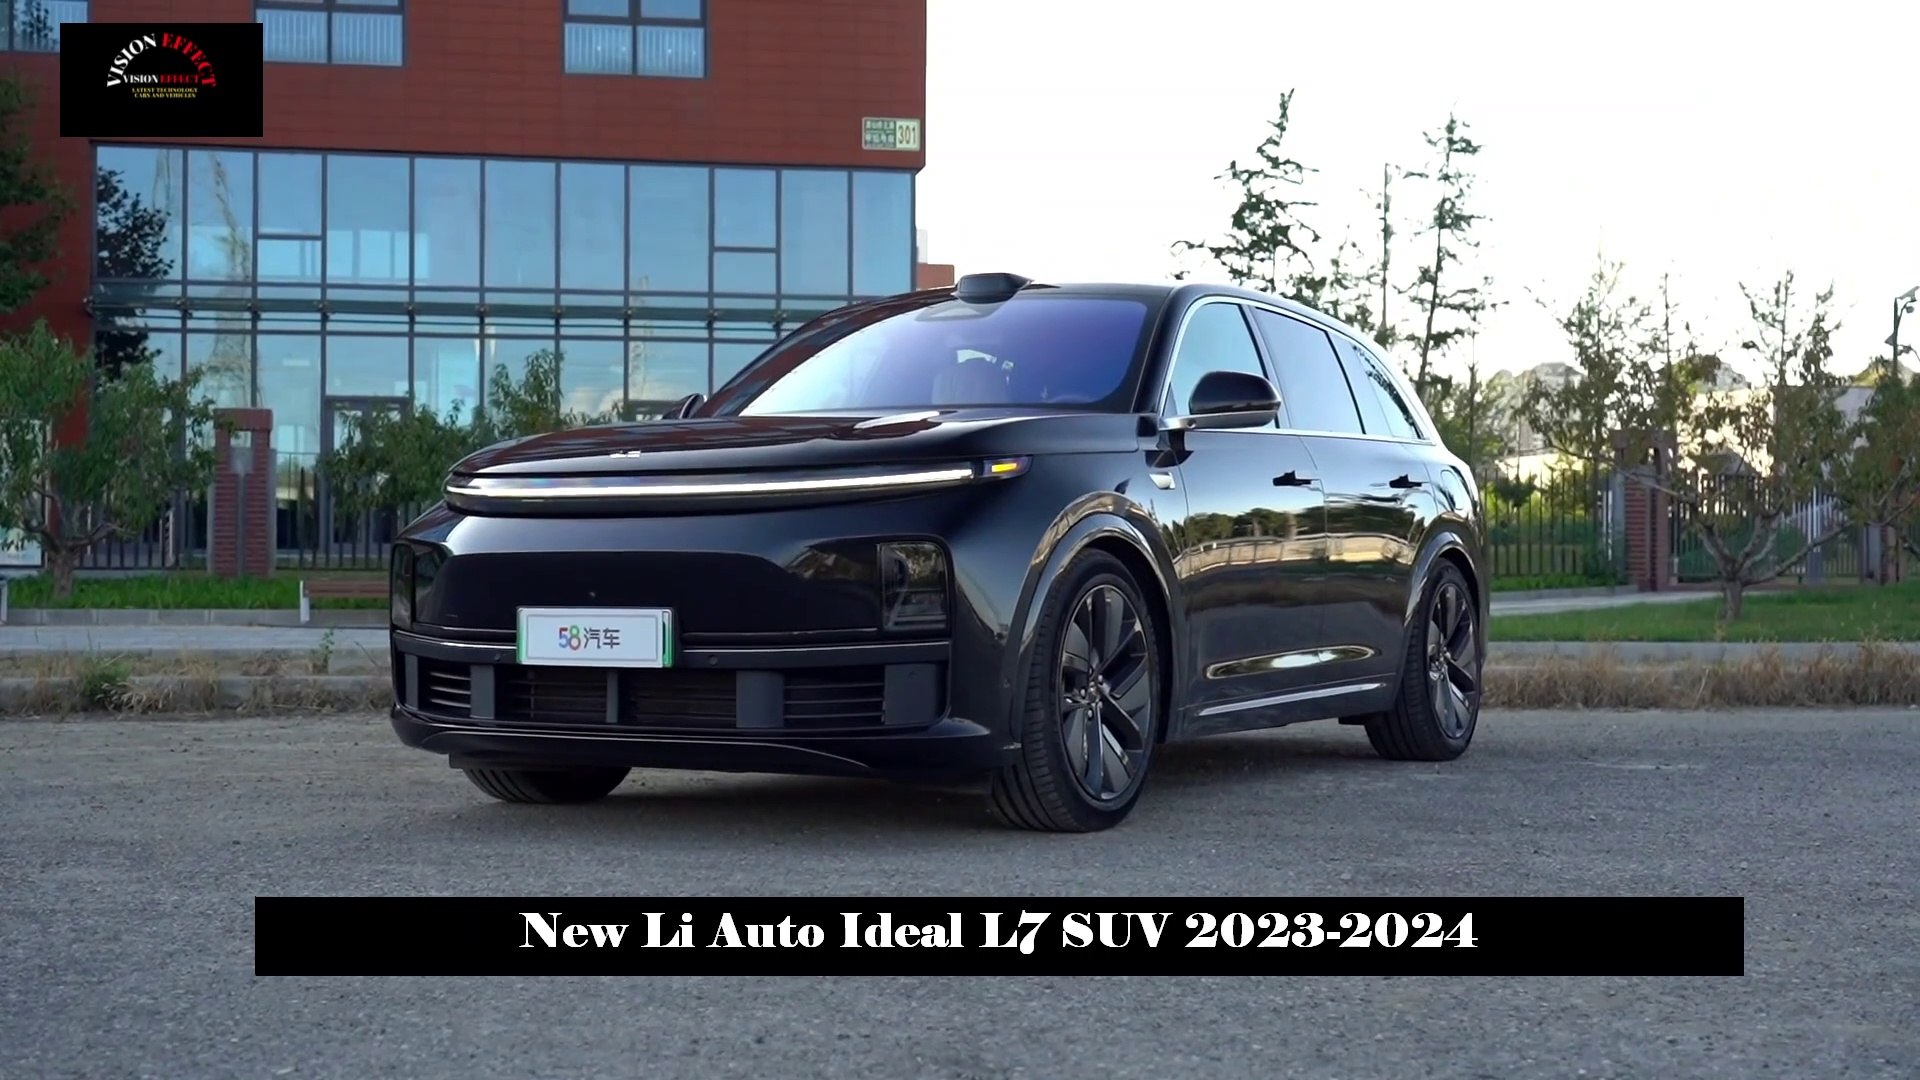 Possibly The Best Luxury SUV of 2023 - Li Auto L7 